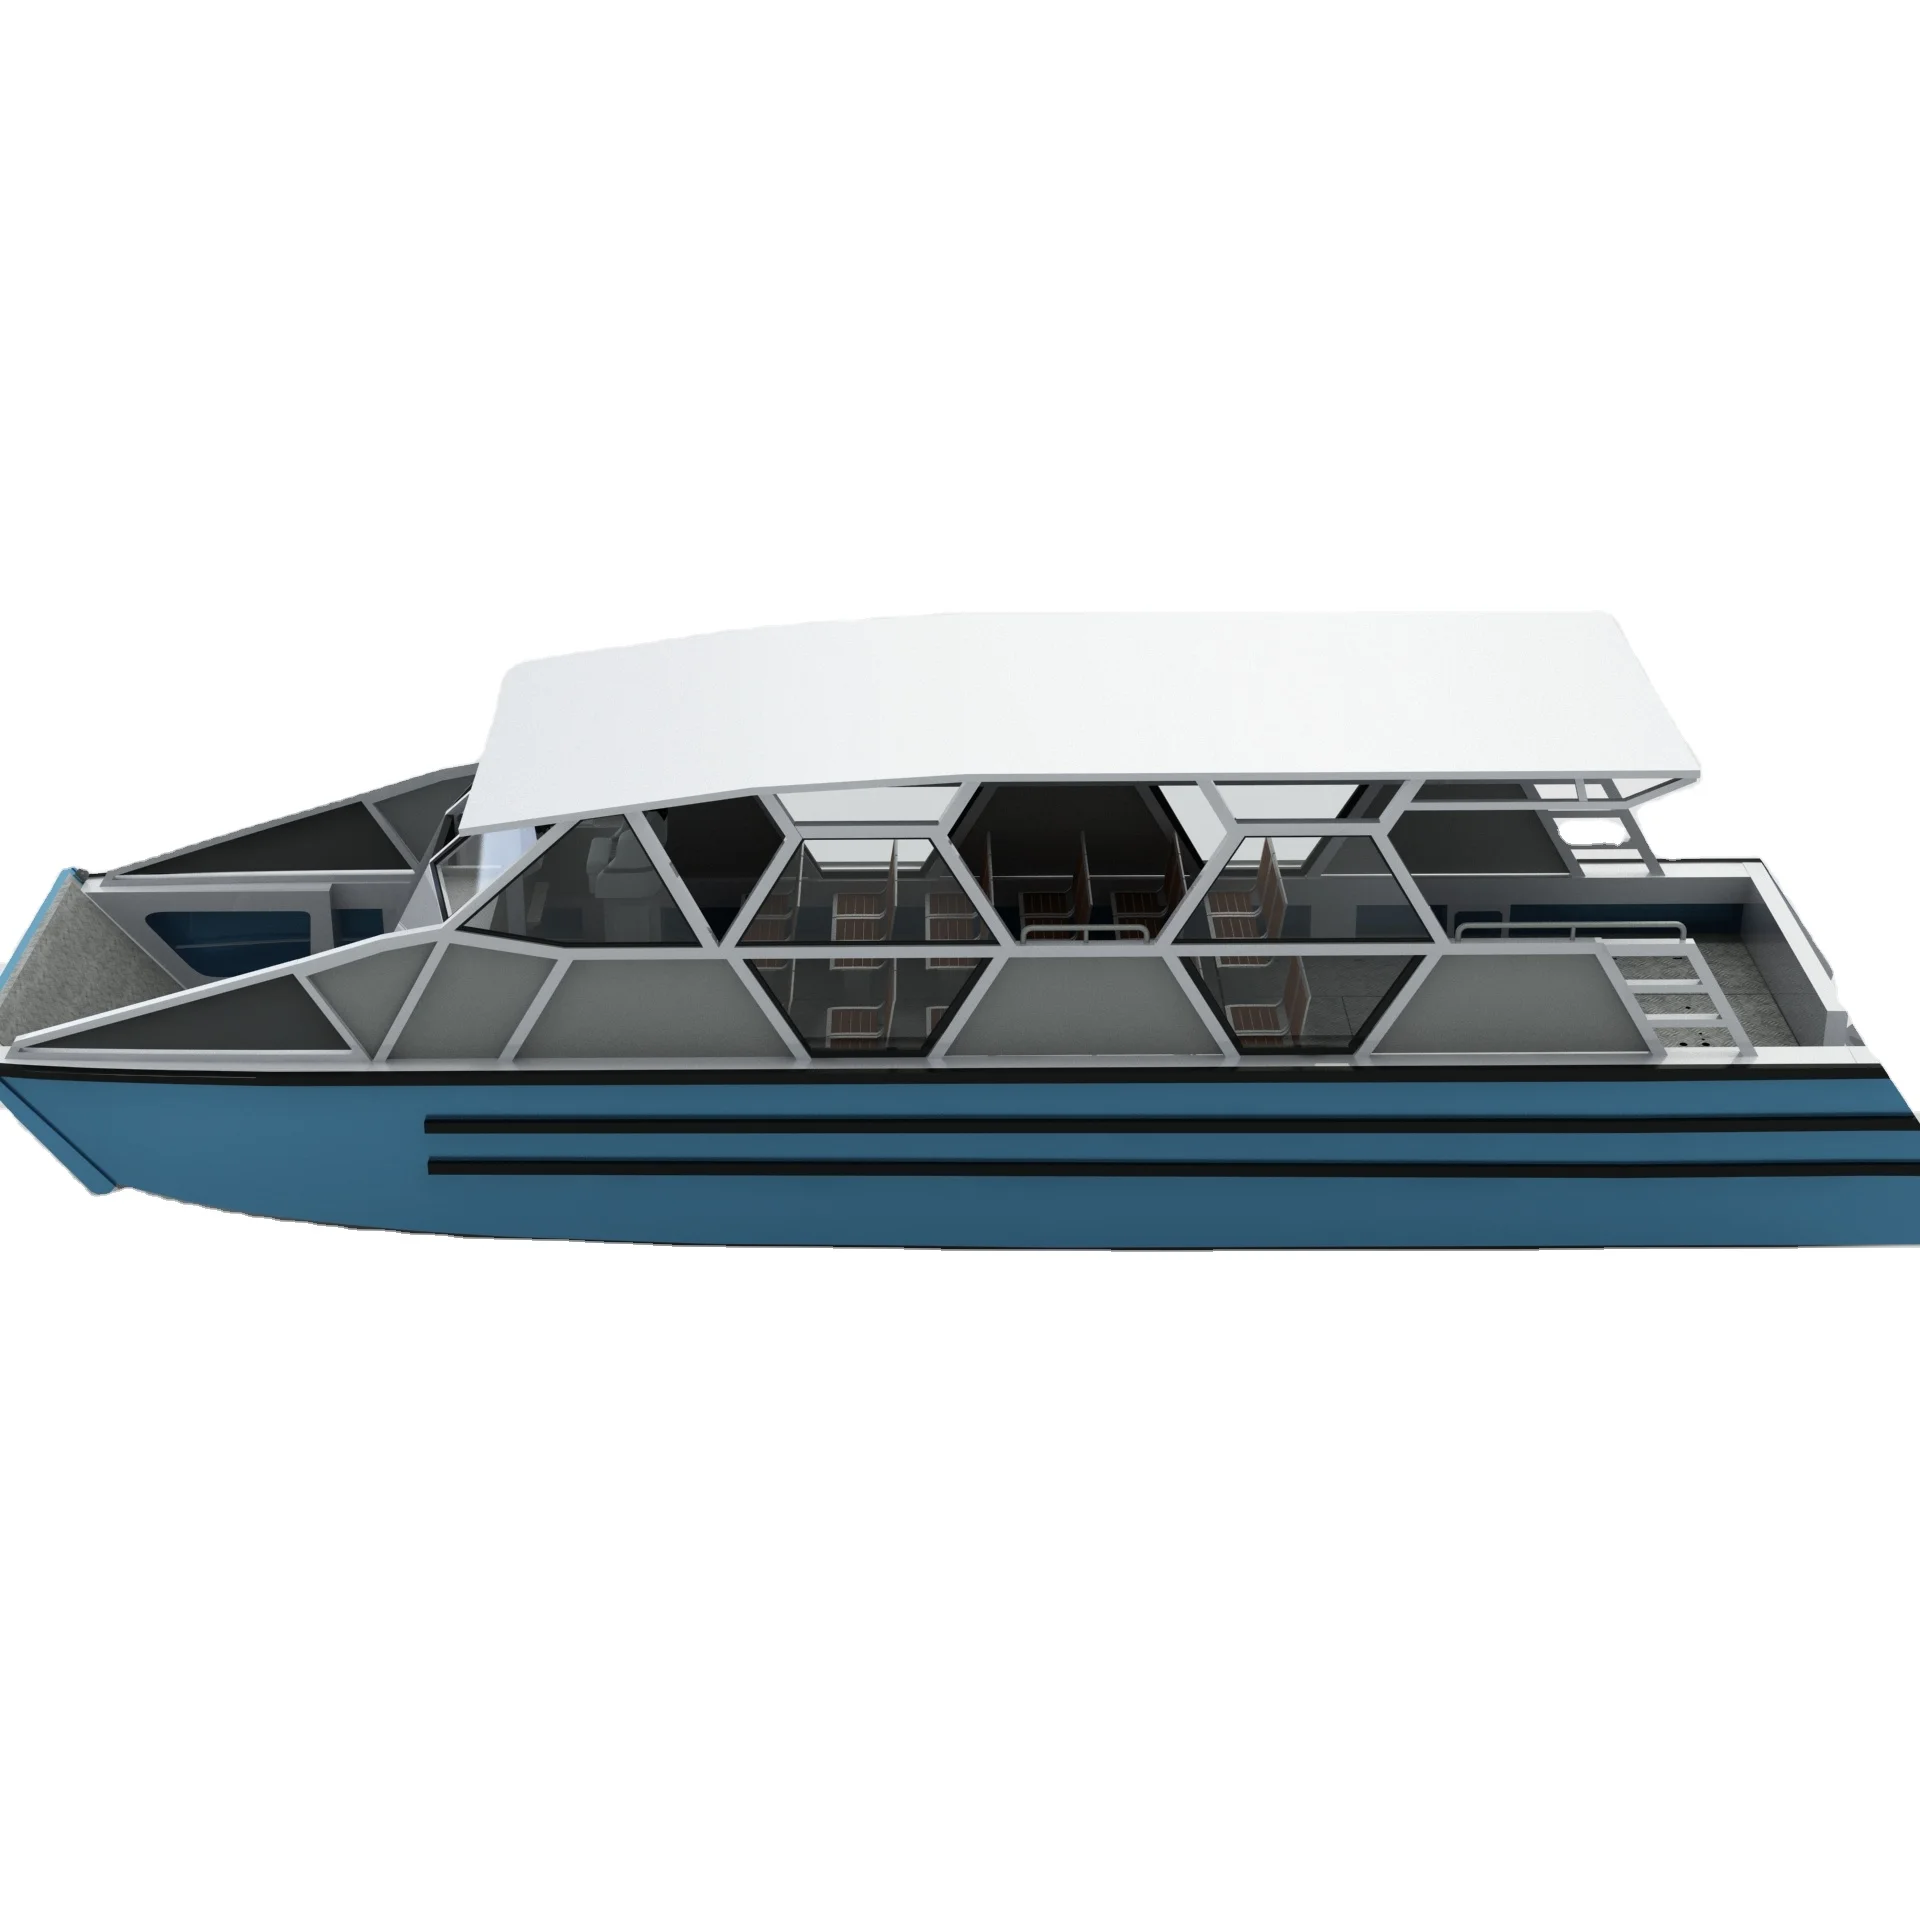 

China Factory Quality 12.6m 30seats Aluminum Durable and Safe Water Taxi Passenger Boat Hot Sales, Customized color